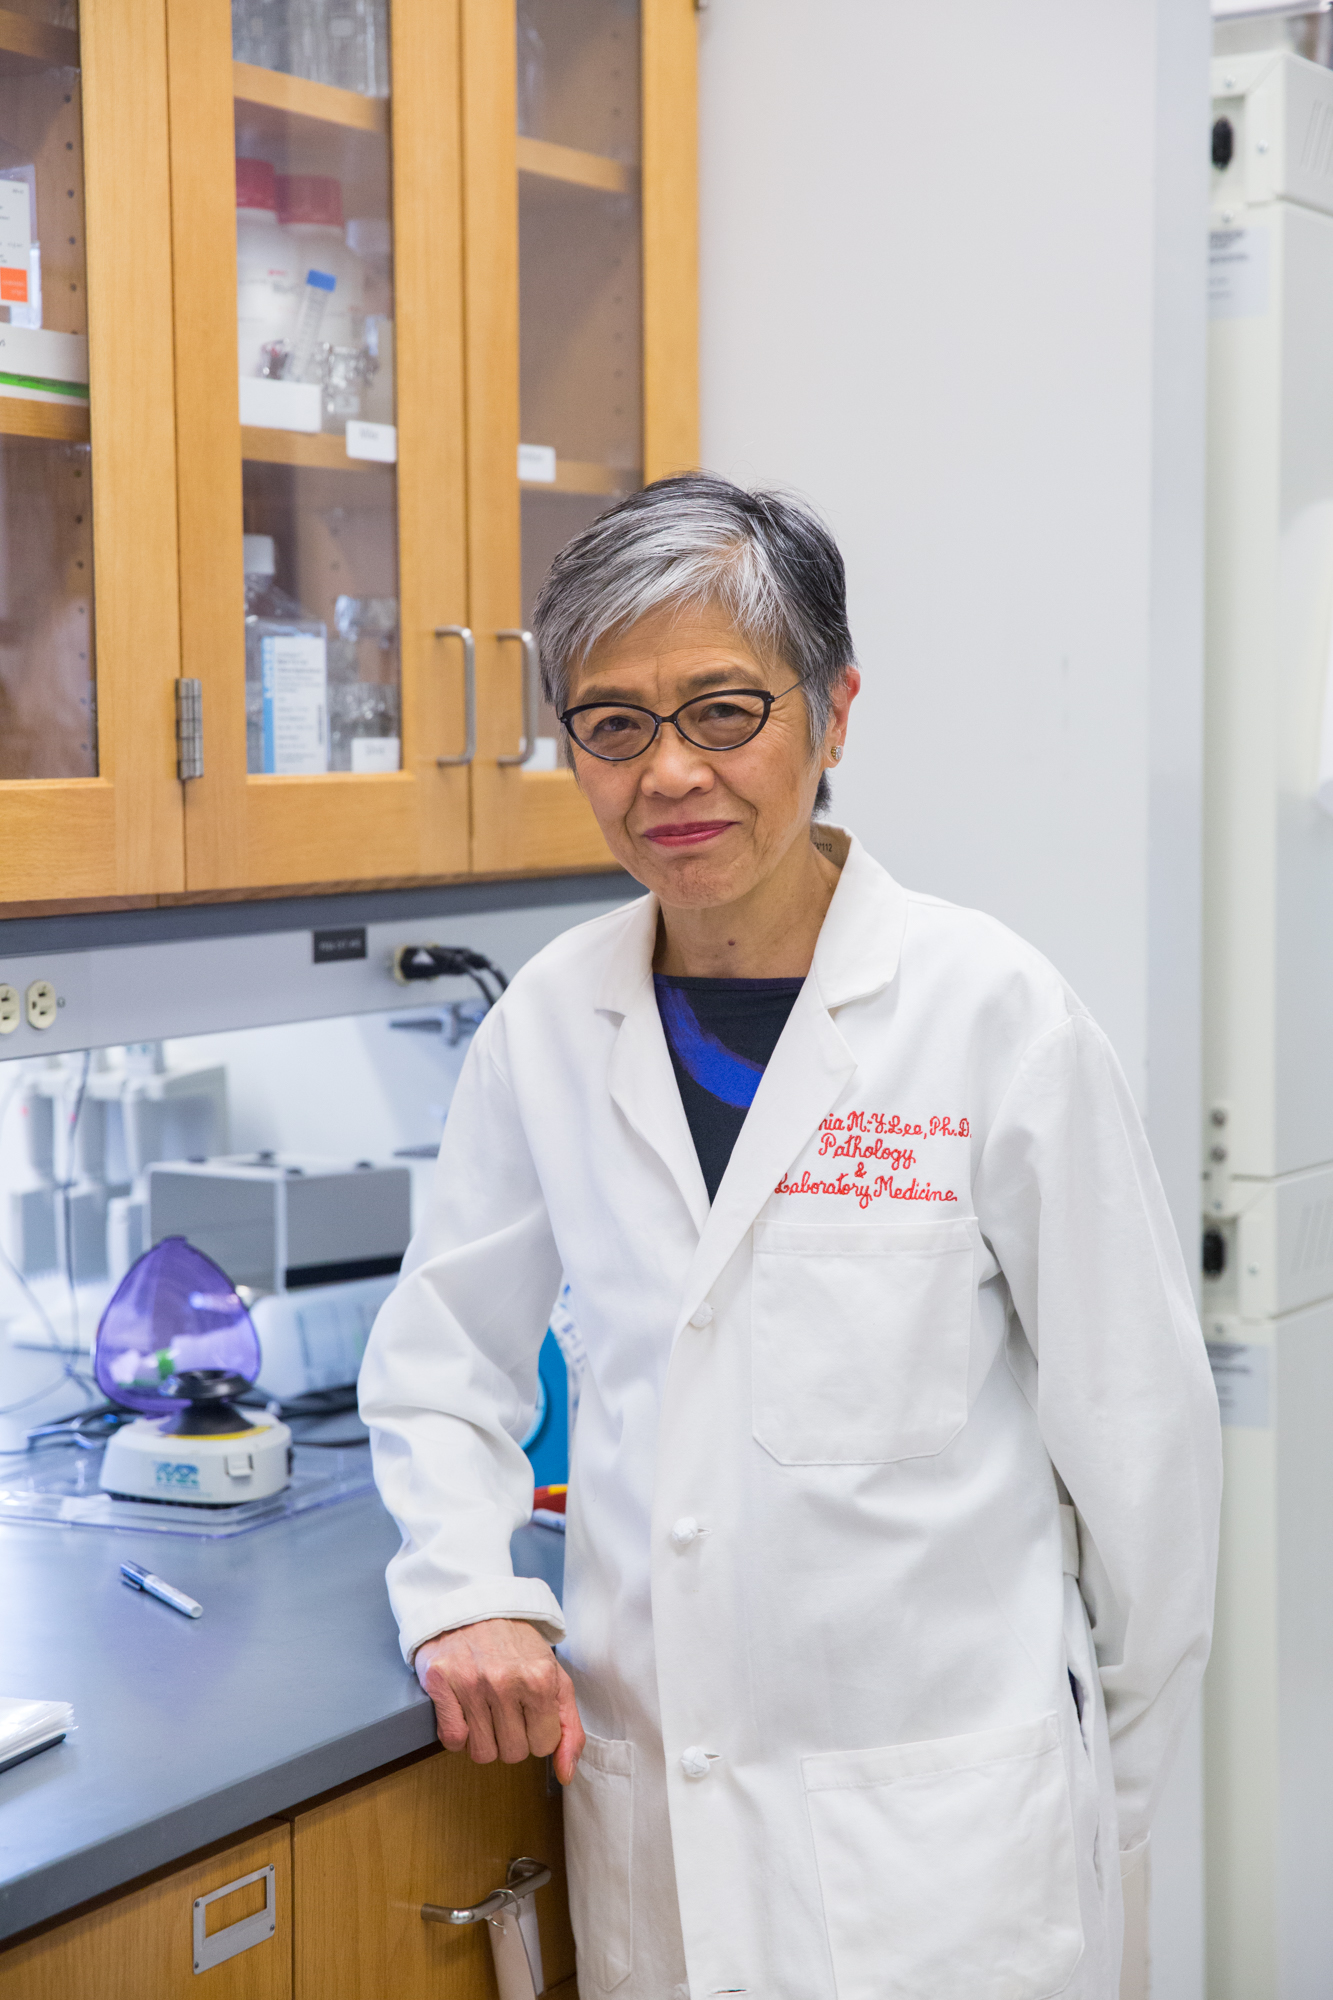 Virginia Man-Yee Lee leads a team of researchers at Penn’s Center for Neurodegenerative Disease Research